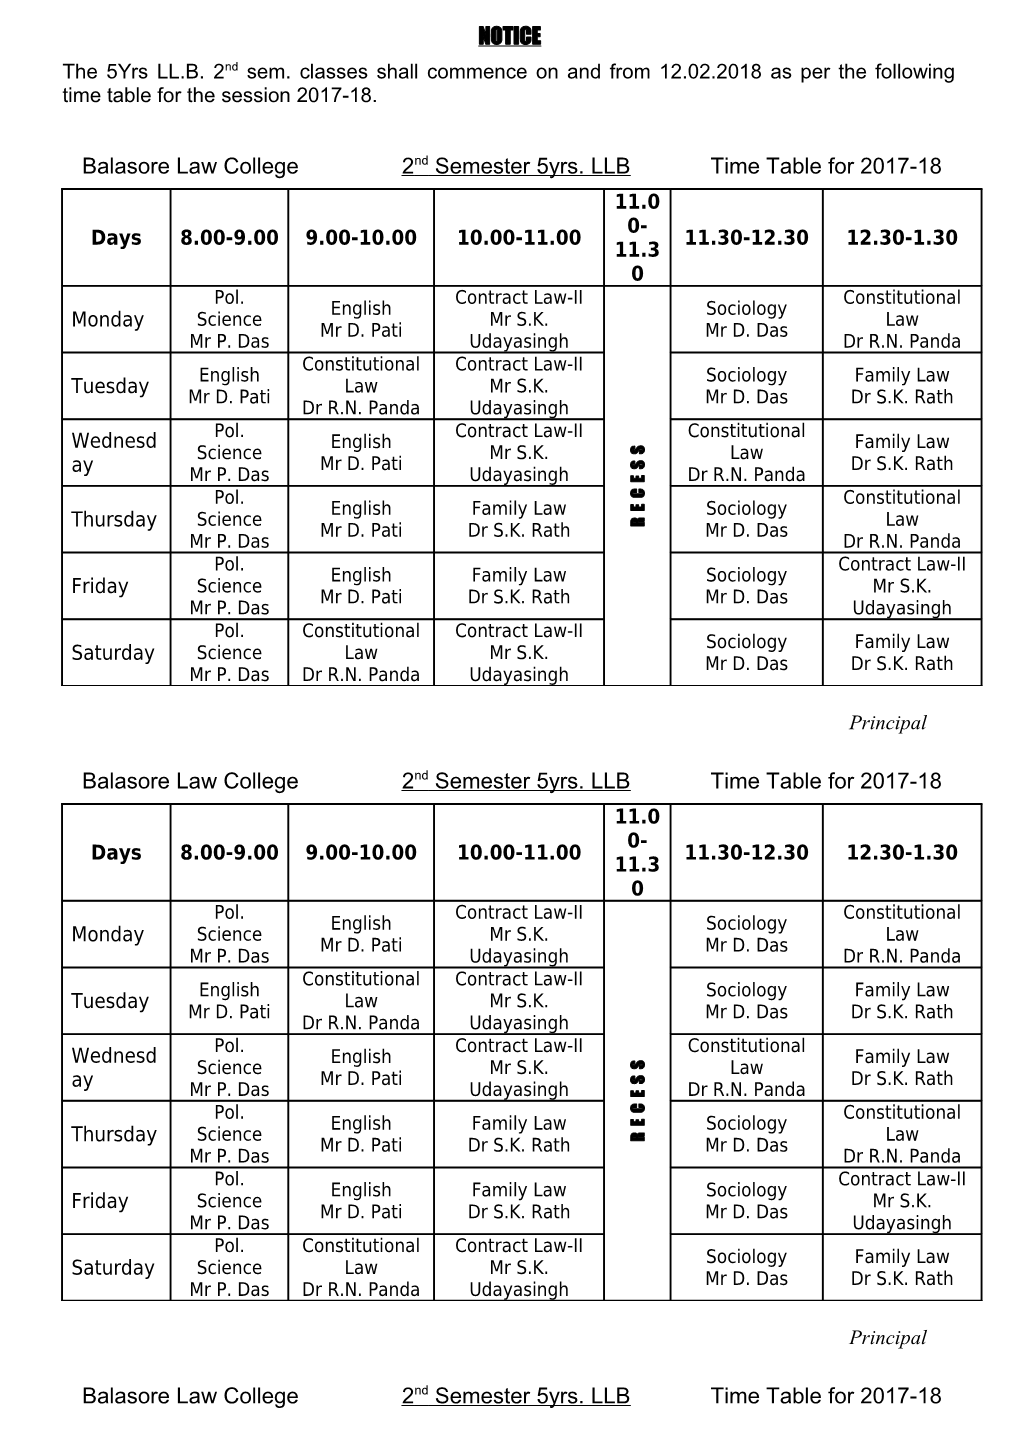 Time Table for 2008-09